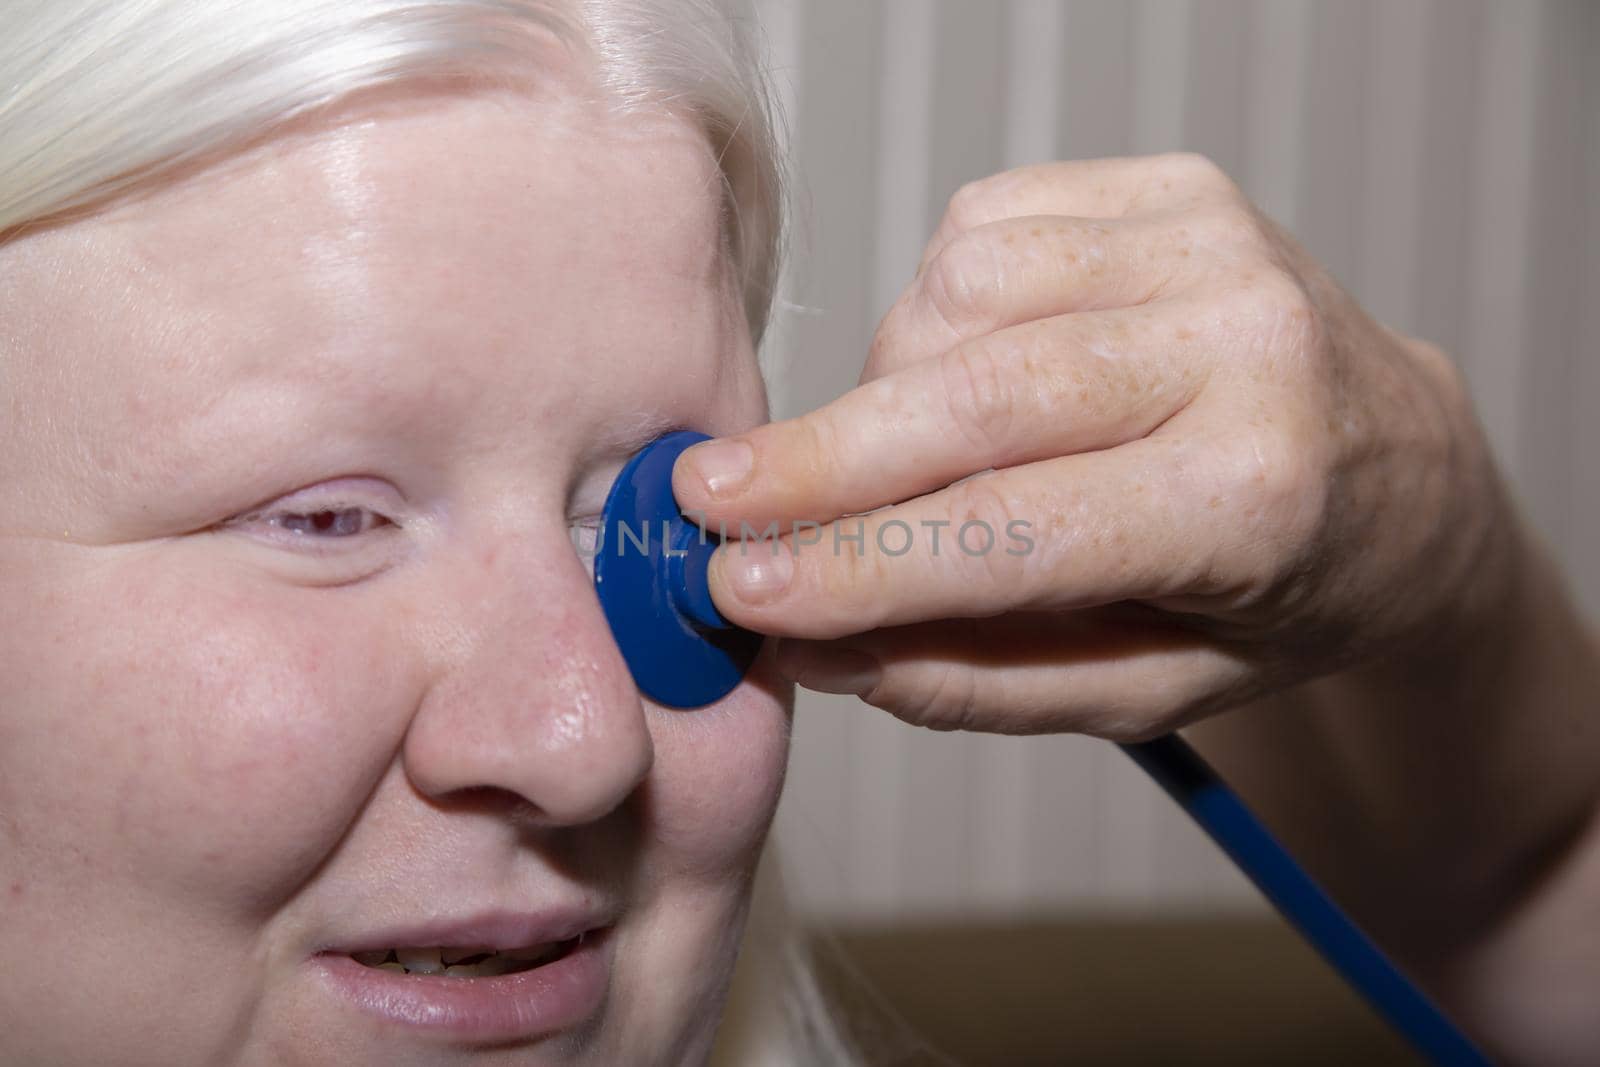 Medical professional holding a stethoscope up to a patient's eye